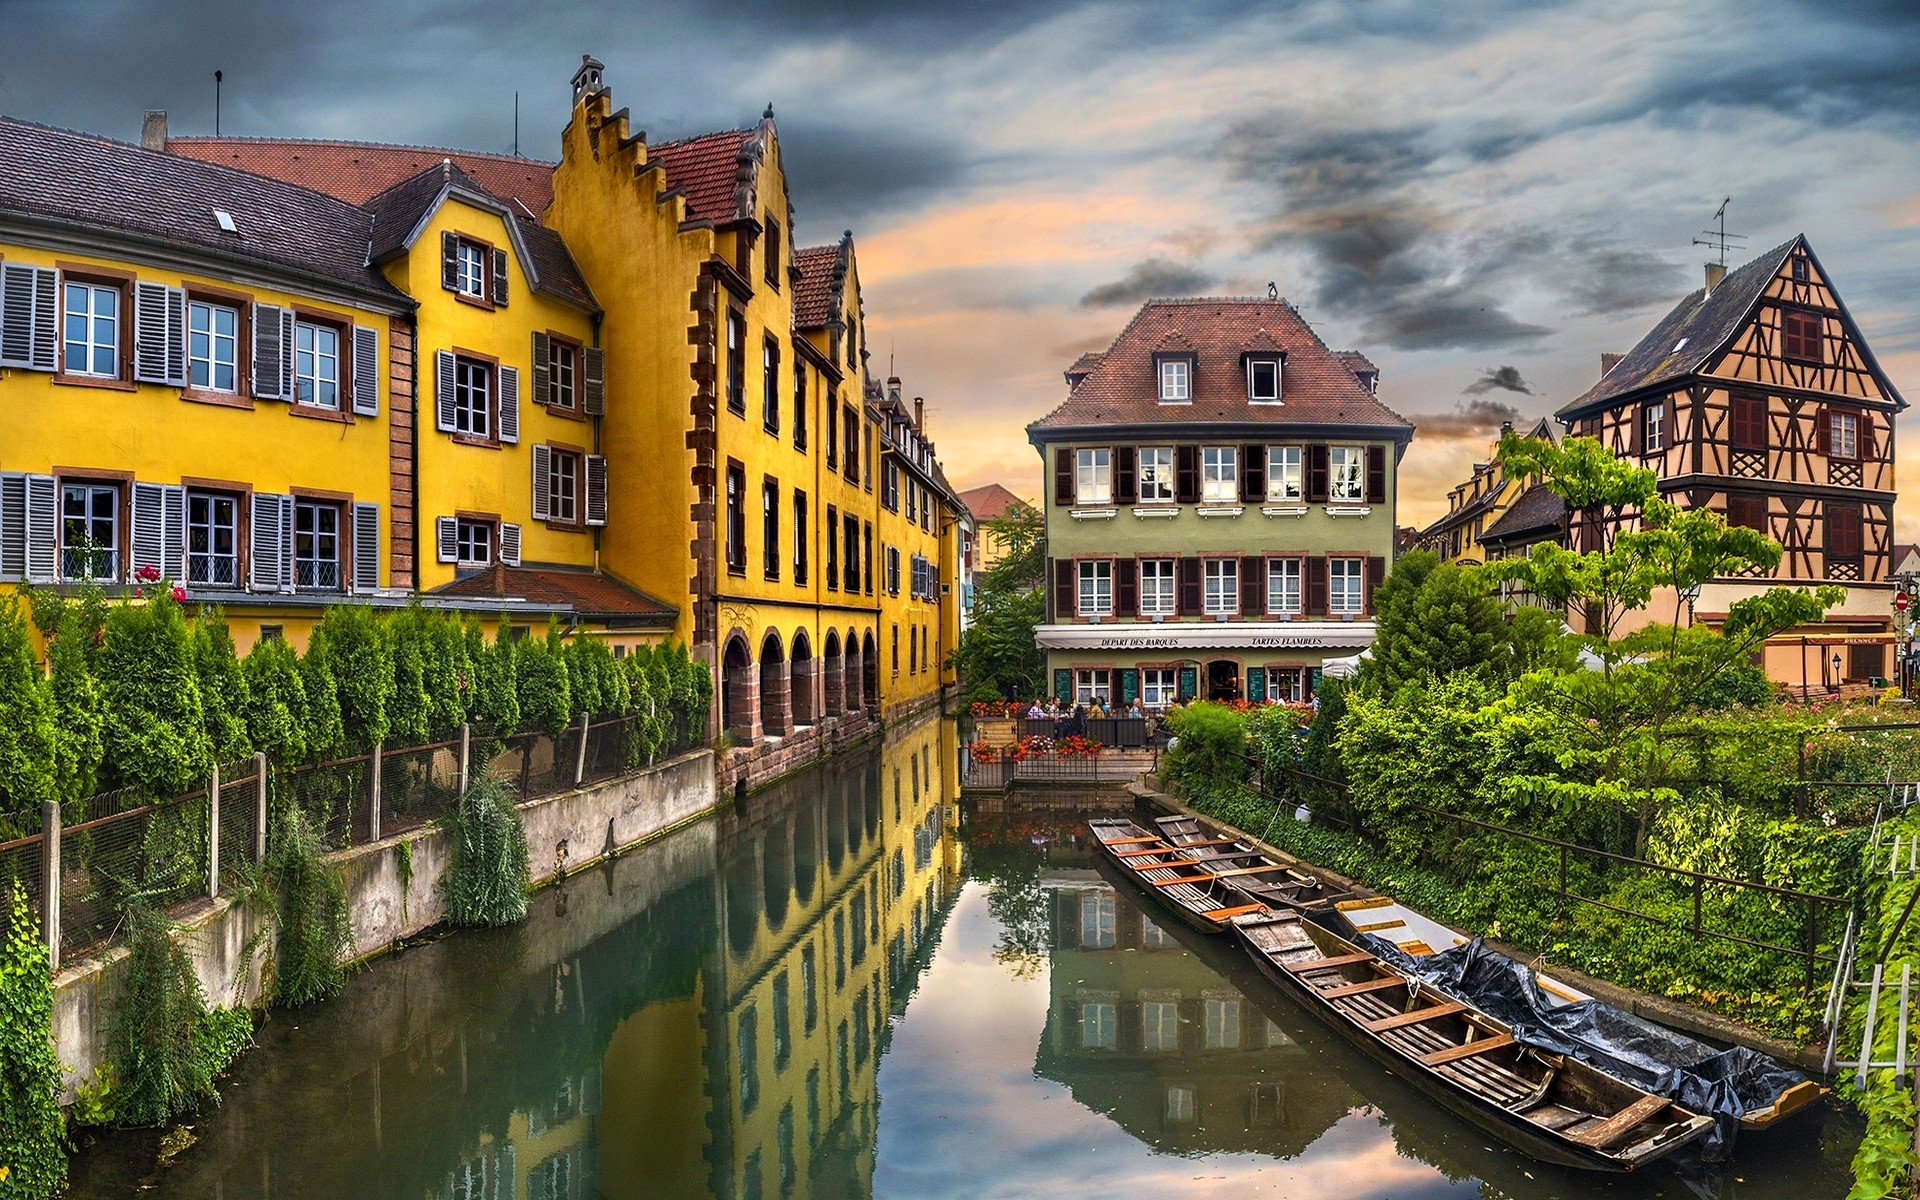 #landscape, #architecture, #Europe, #city, #water, #old building, #trees, #France, #reflection, #Colmar, #building, #canal, #boat wallpaper Gallery HD Wallpaper